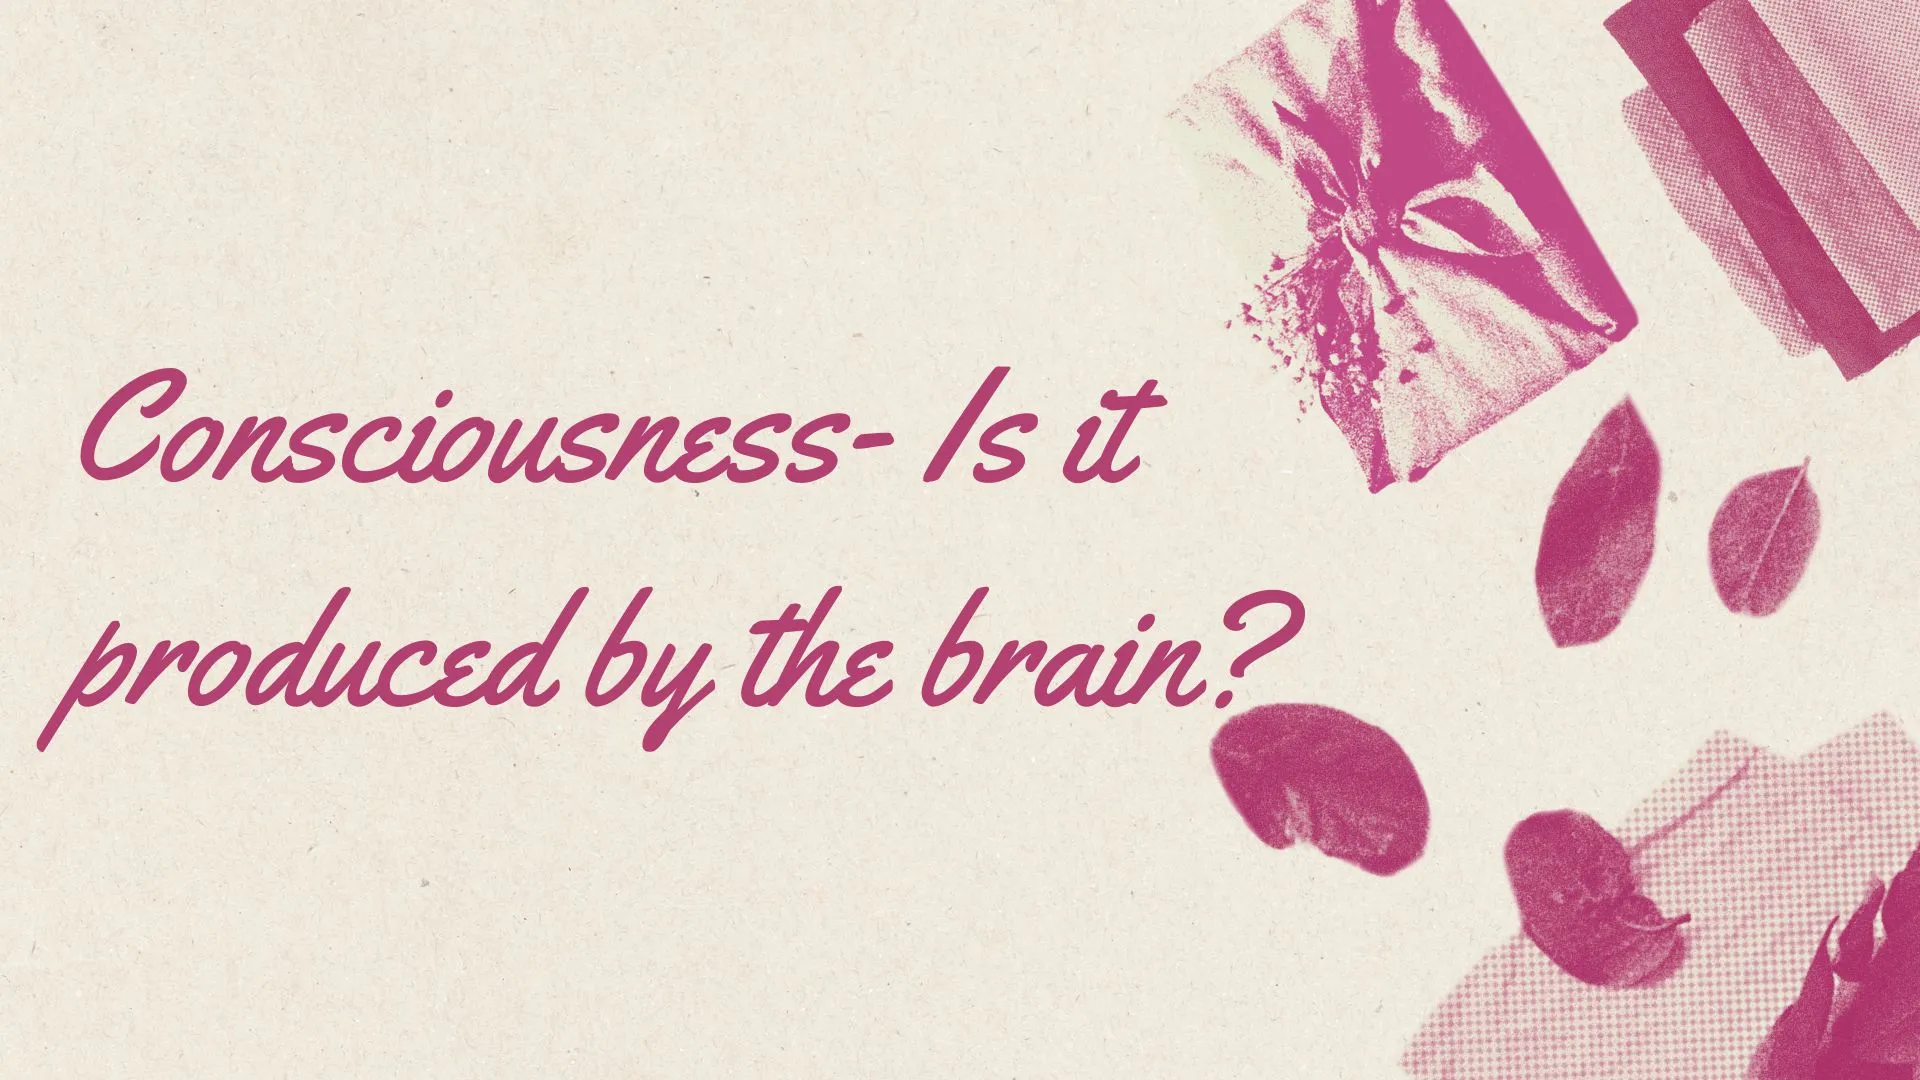 Consciousness- Is it produced by the brain